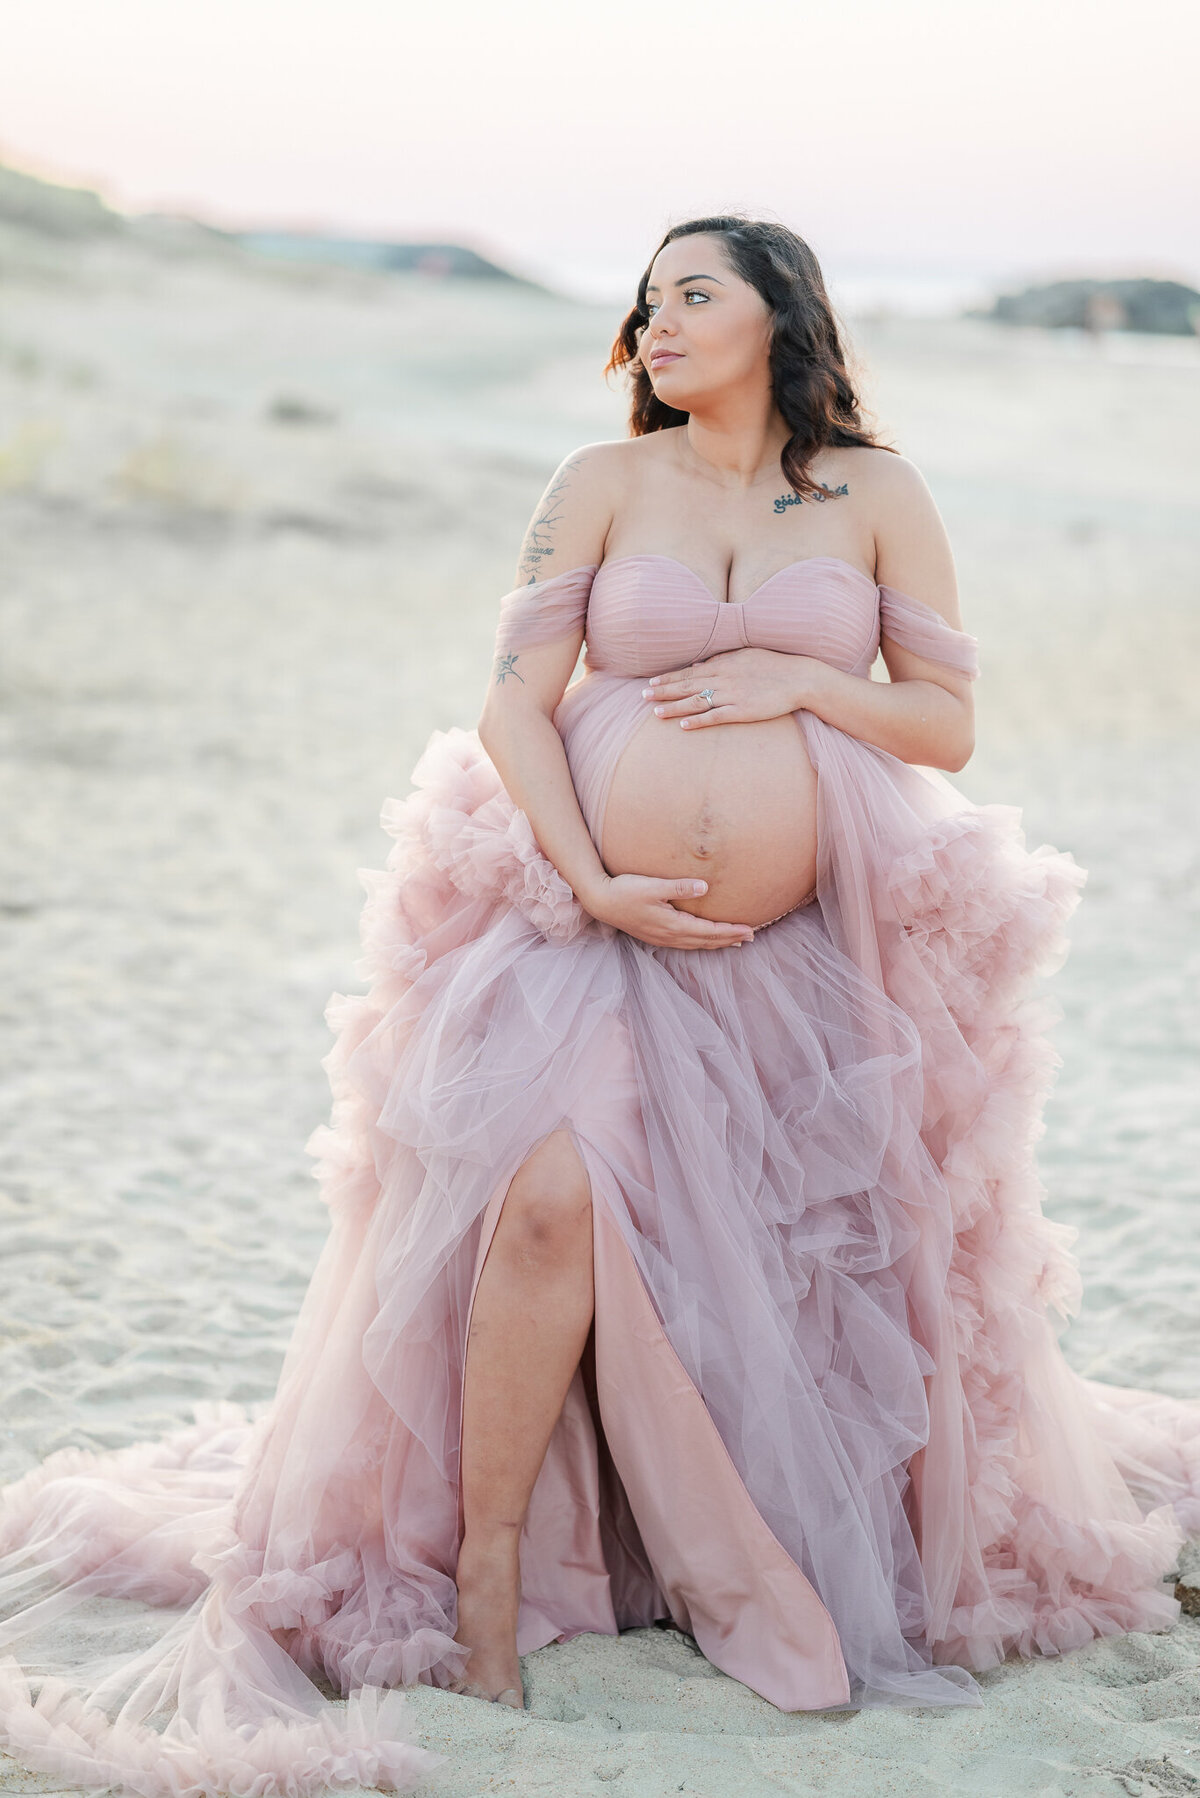 A pregnant woman holds her belly and looks off to her right. She wears a pink tulle gown during her beach maternity photos.